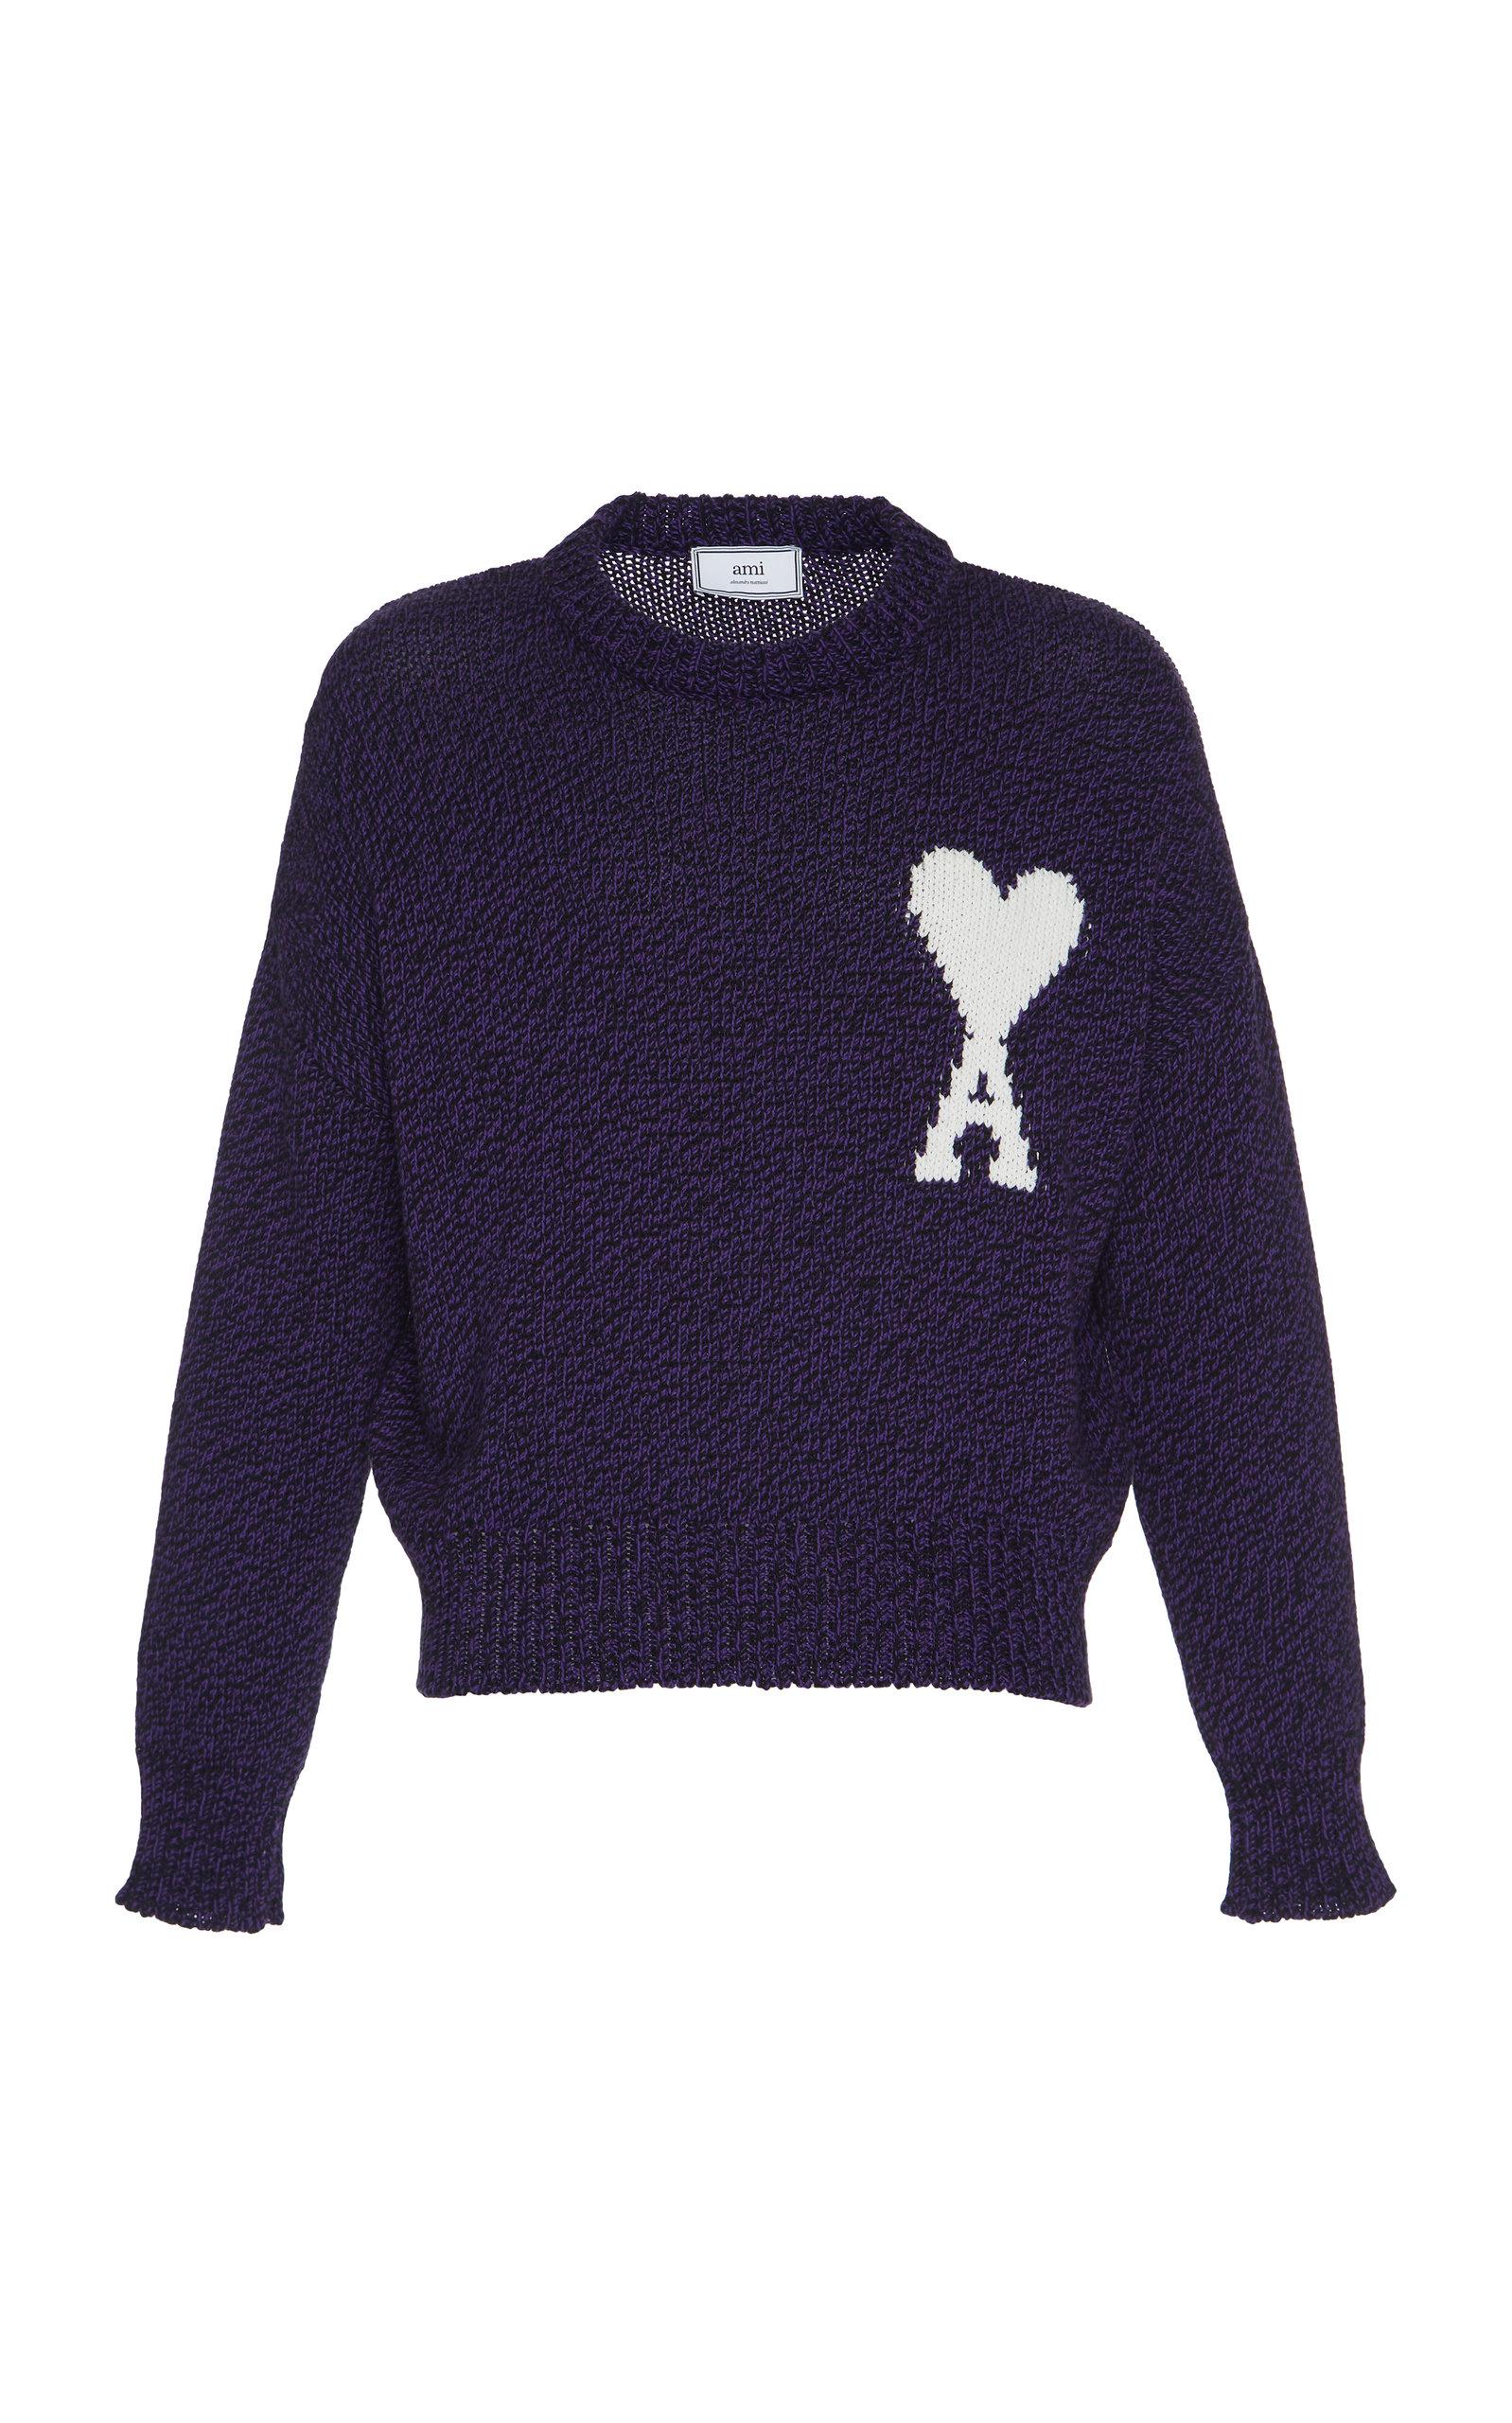 AMI Intarsia-knit Cotton And Wool Logo Sweater in Purple for Men 